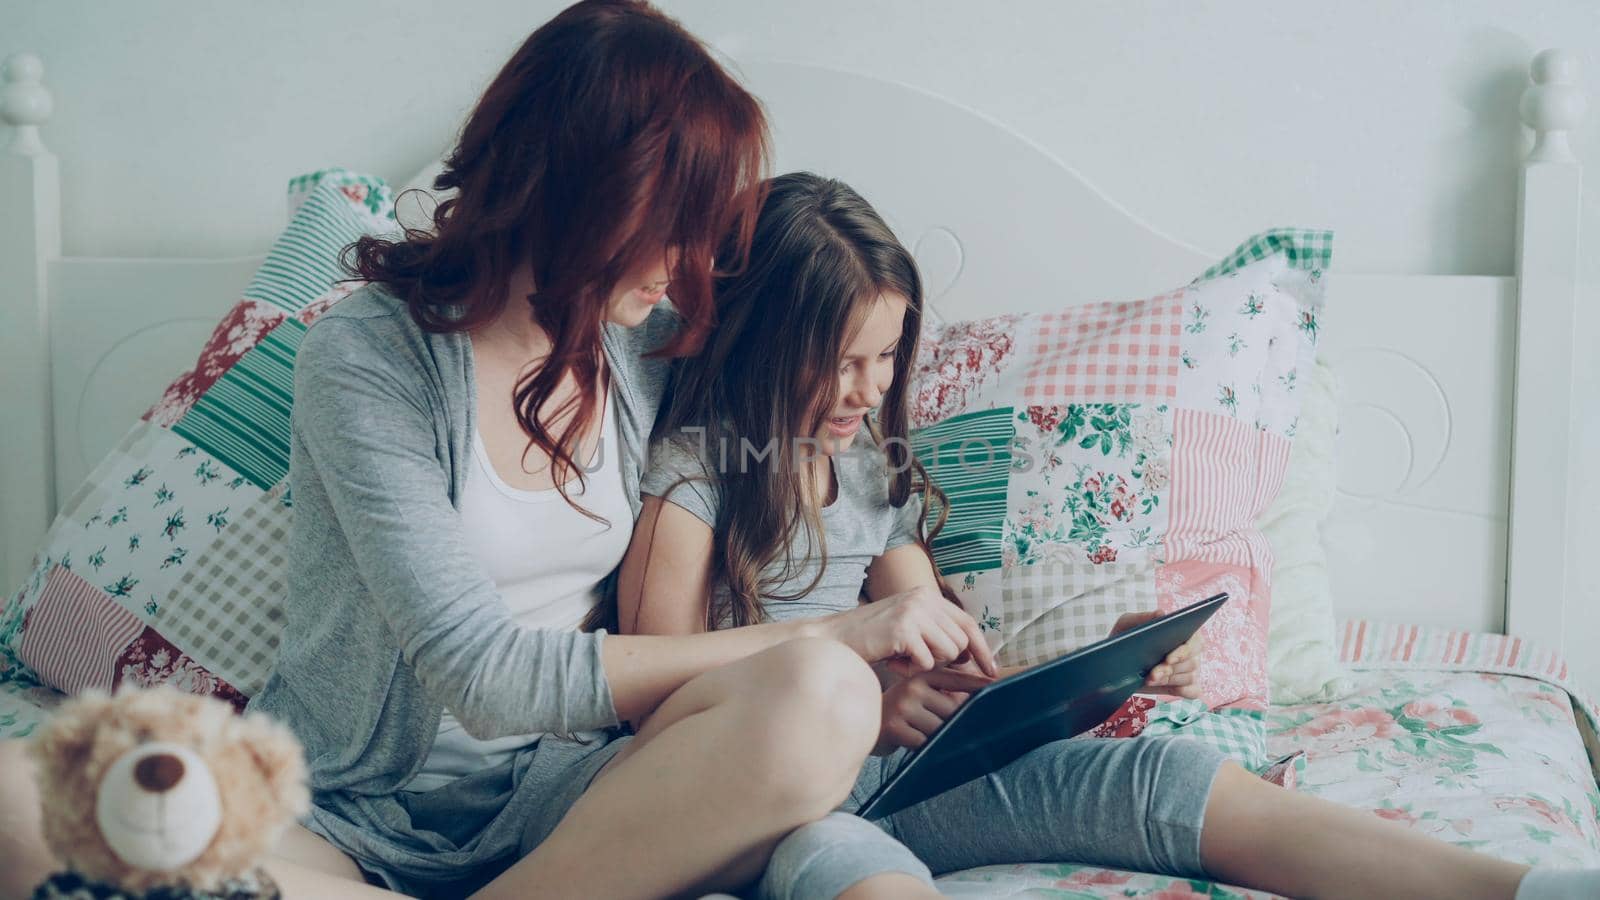 Smiling cute girl and her young mother laughing and using digital tablet while sitting on bed at home in the morning. Technology, home and family concept